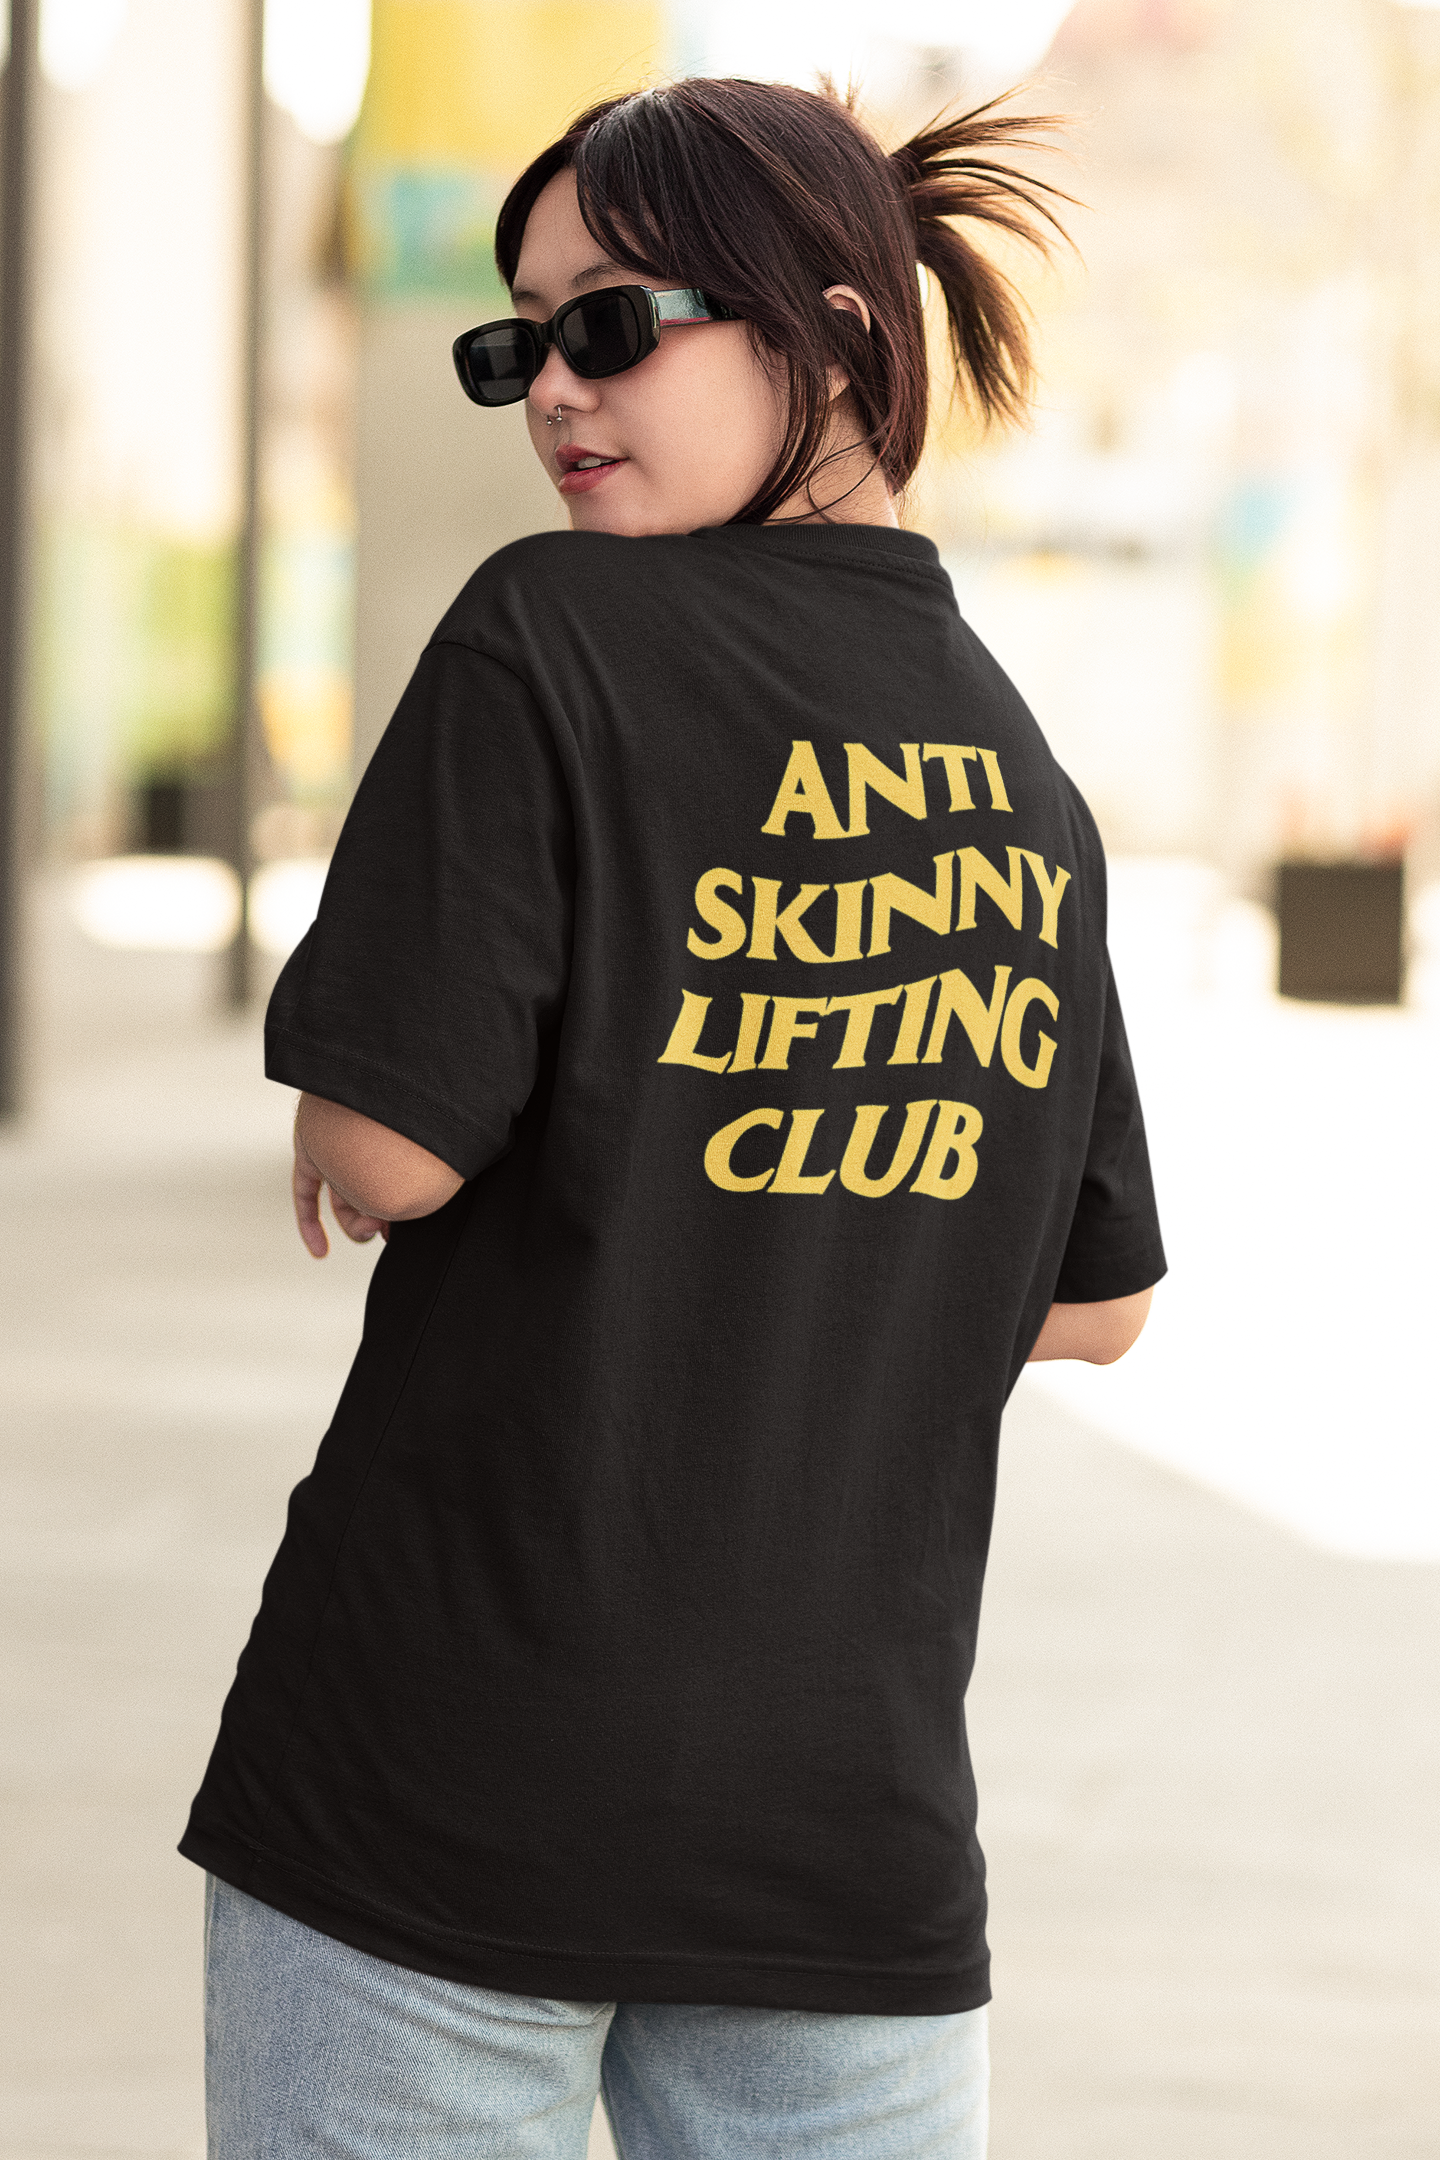 Gym Oversized T Shirt - Your anxiety is lying to you - 15 Days